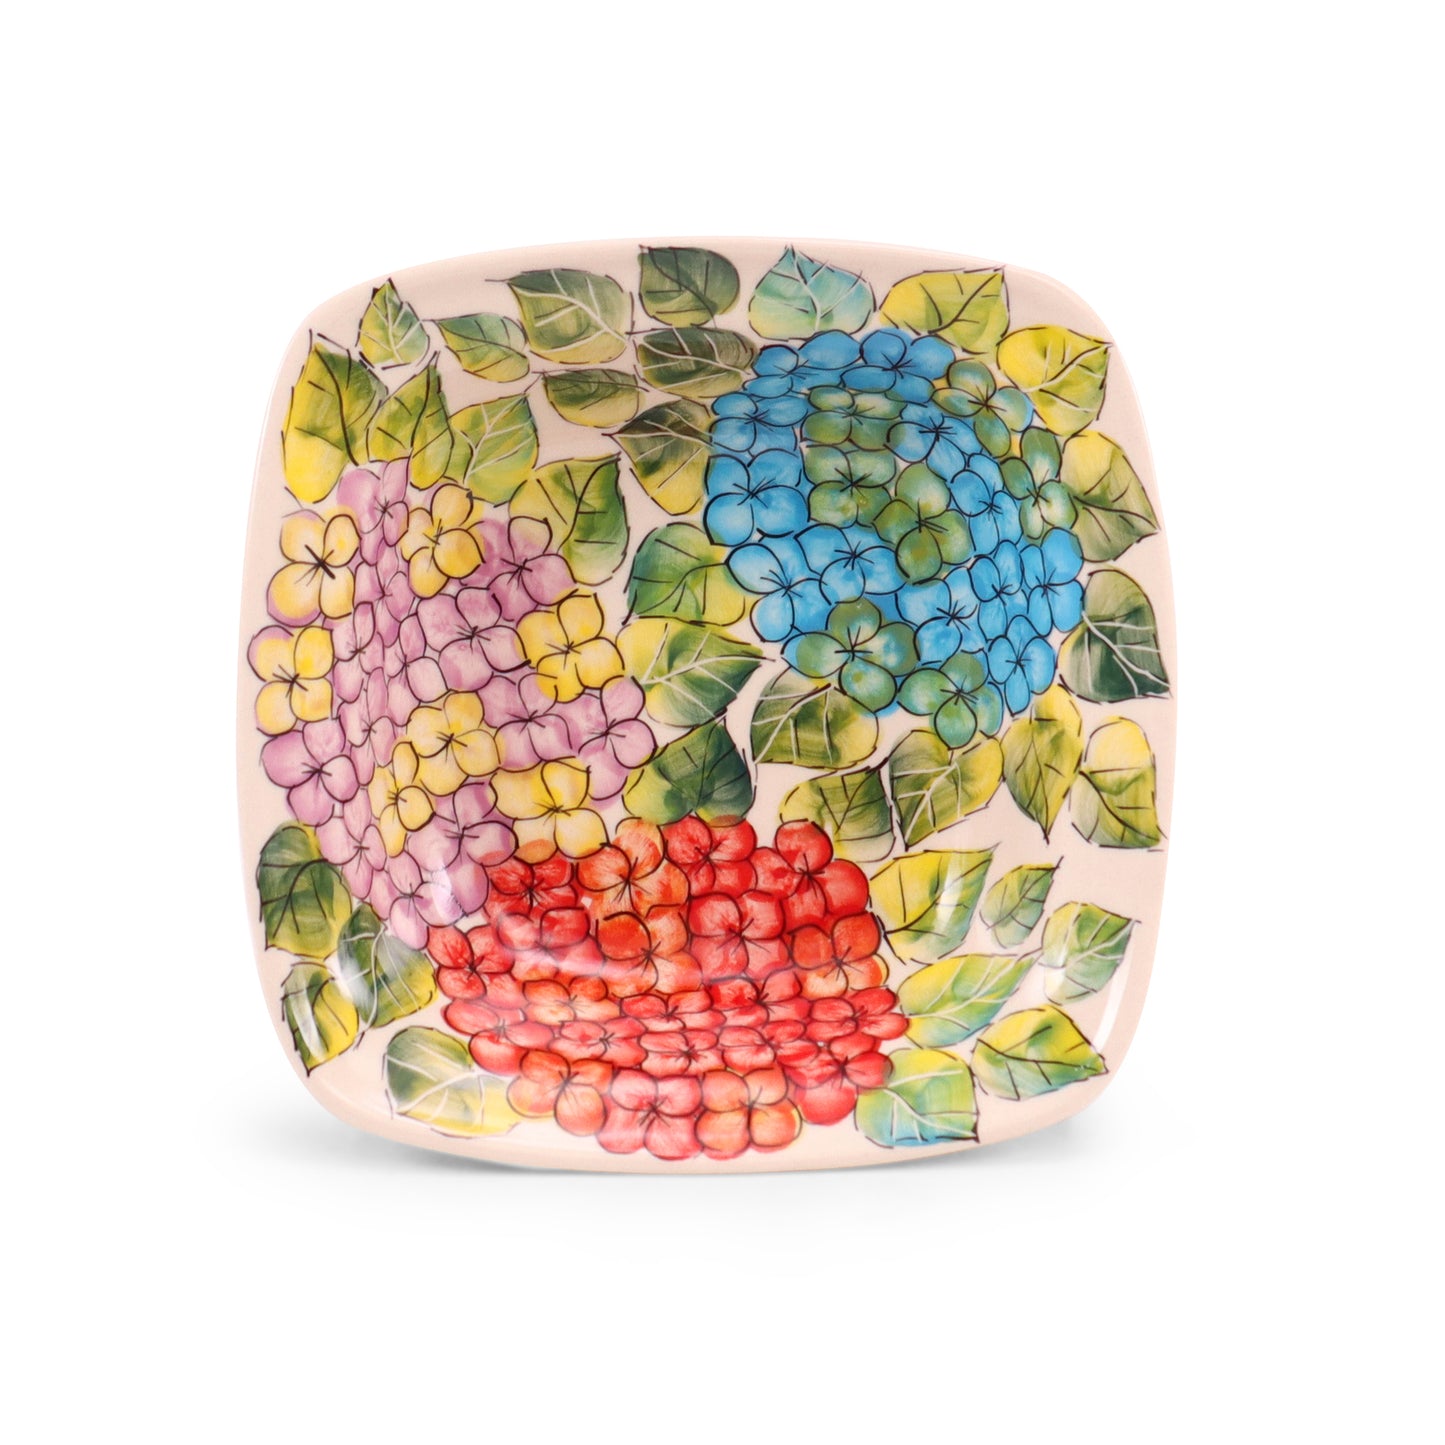 7" Square Bowl with Lip. Pattern: A45